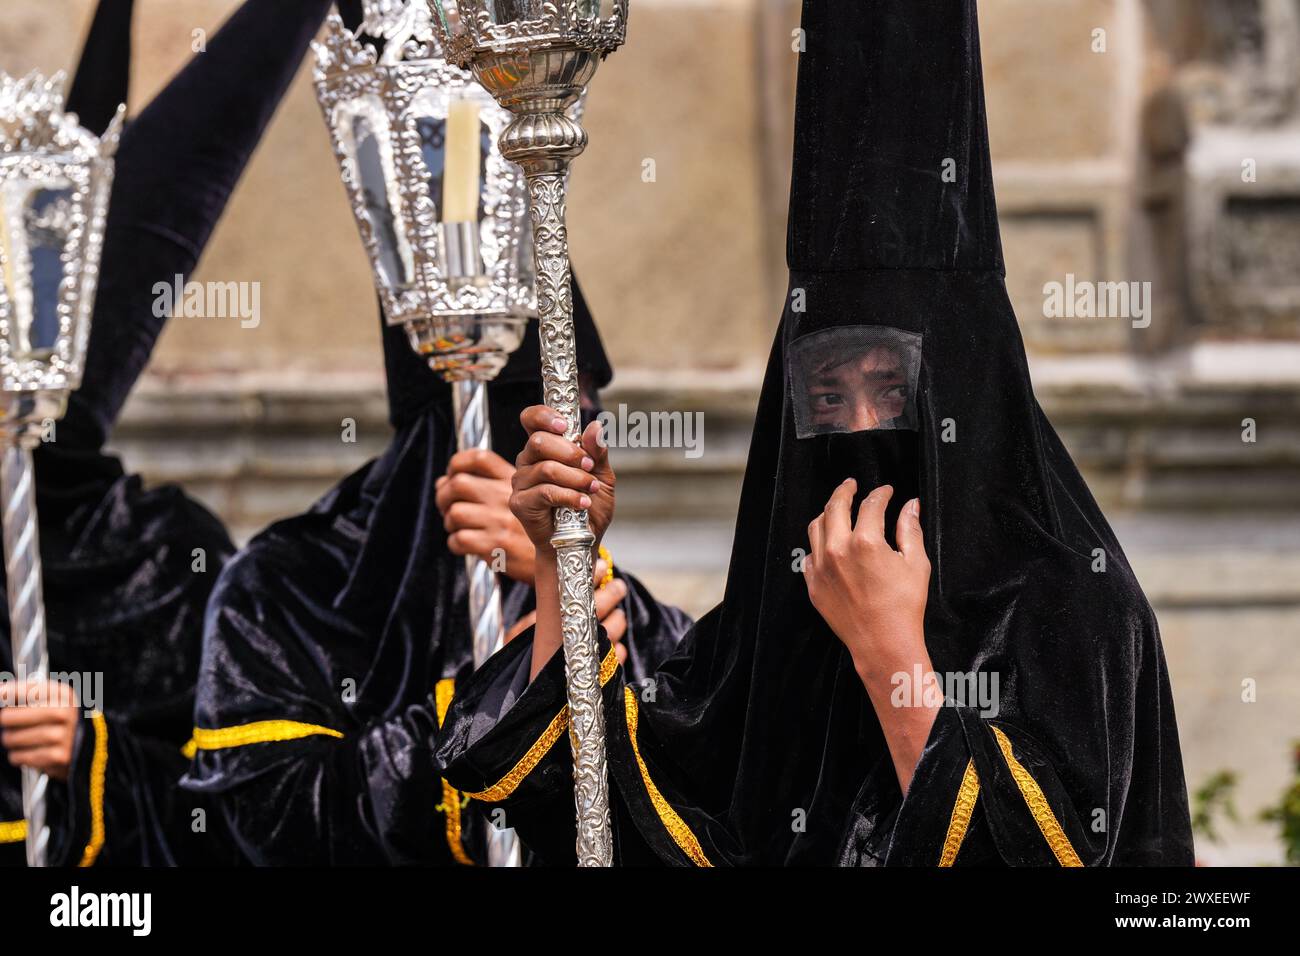 Antigua, Guatemala. 29th Mar, 2024. A confraternity of penitents, wearing capirote hats, wait outside the Escuela de Cristo church for the start of the Senor Sepultado Good Friday procession during Semana Santa, March 29, 2024 in Antigua, Guatemala. The opulent procession is one of the largest in the world involving thousands of devotees and lasting 12-hours. Credit: Richard Ellis/Richard Ellis/Alamy Live News Stock Photo